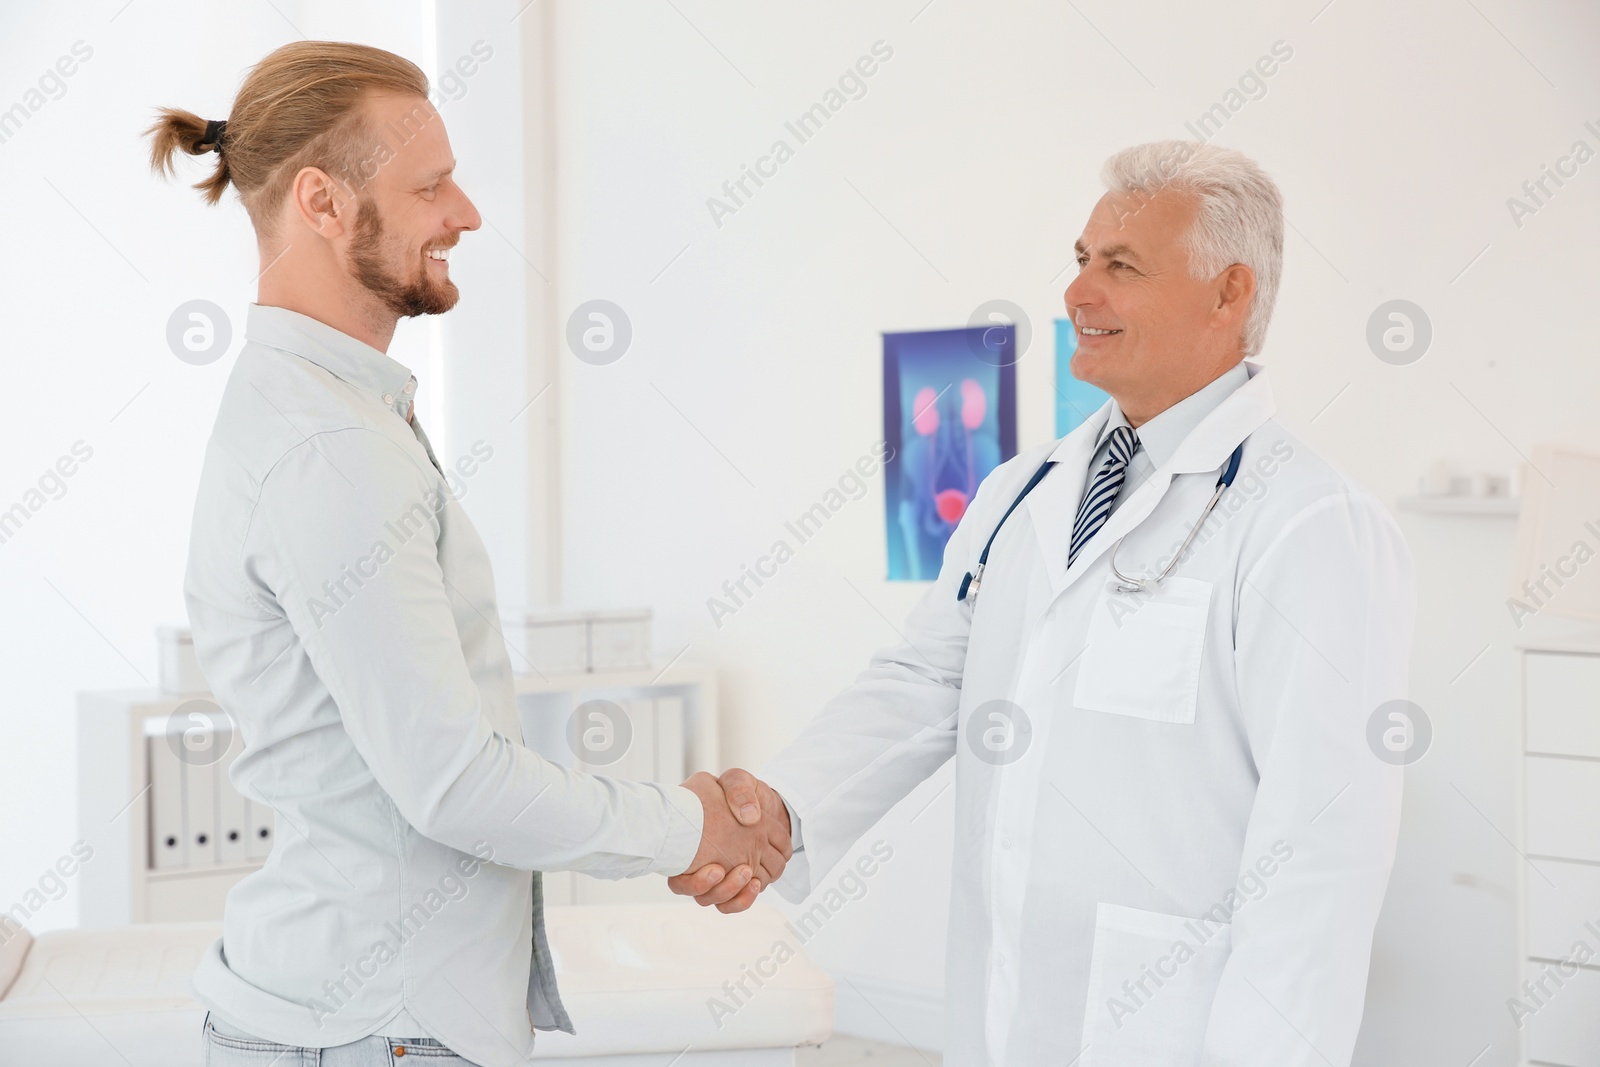 Photo of Urologist and thankful patient shaking hands at hospital